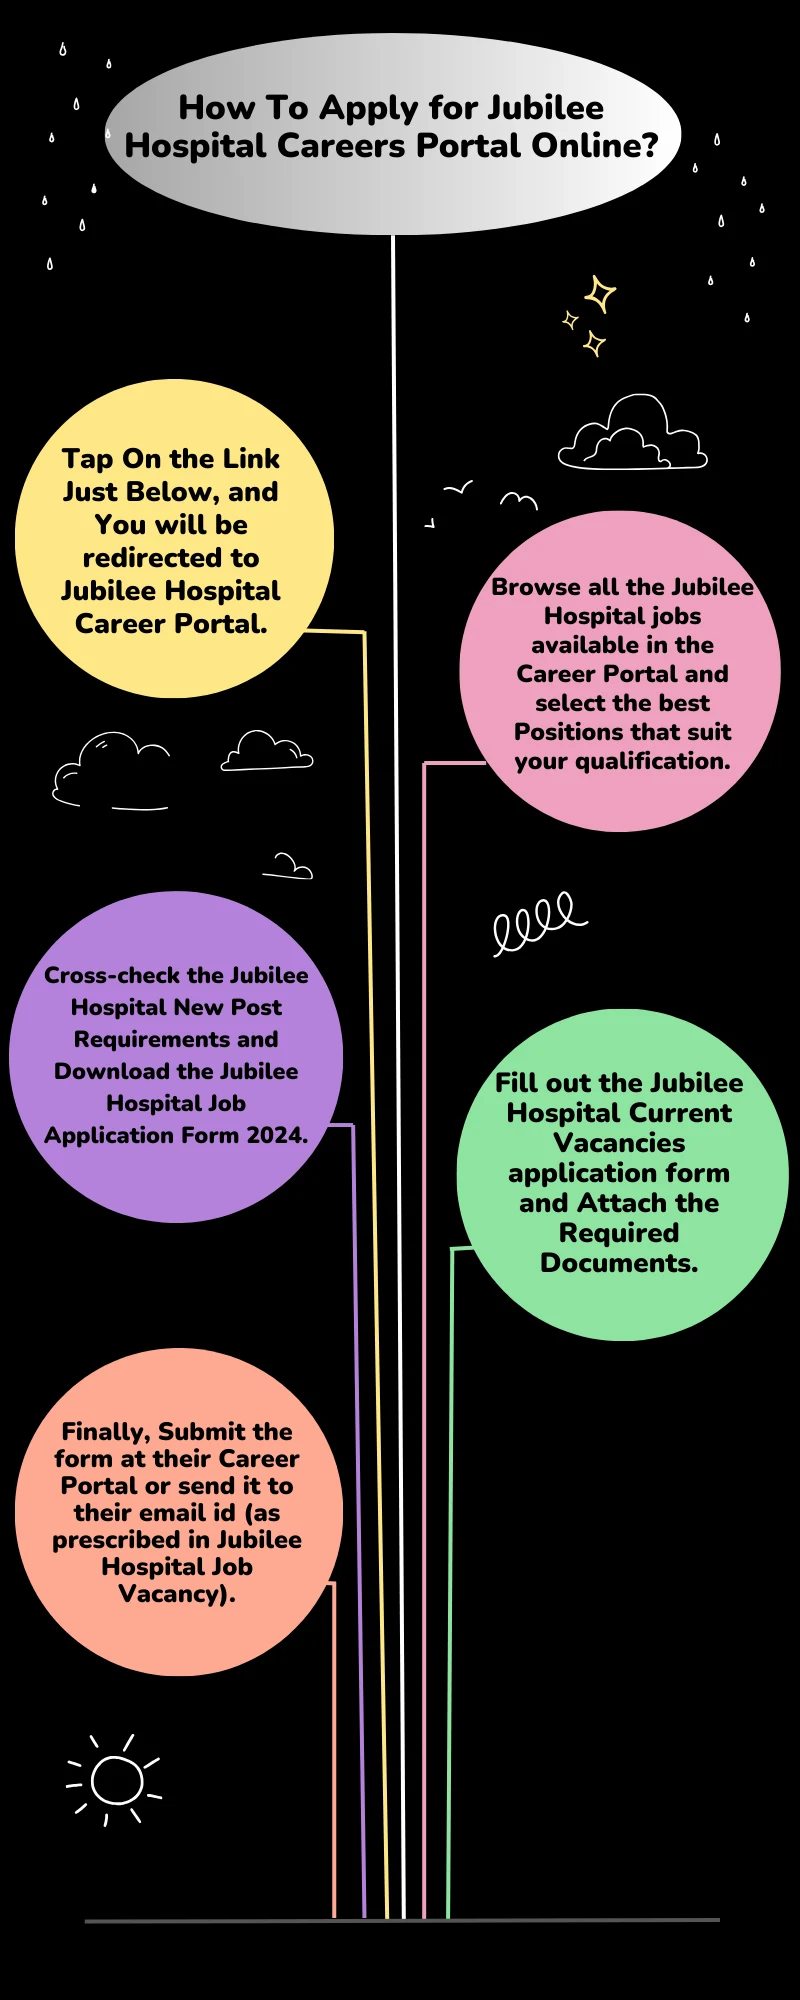 How To Apply for Jubilee Hospital Careers Portal Online?